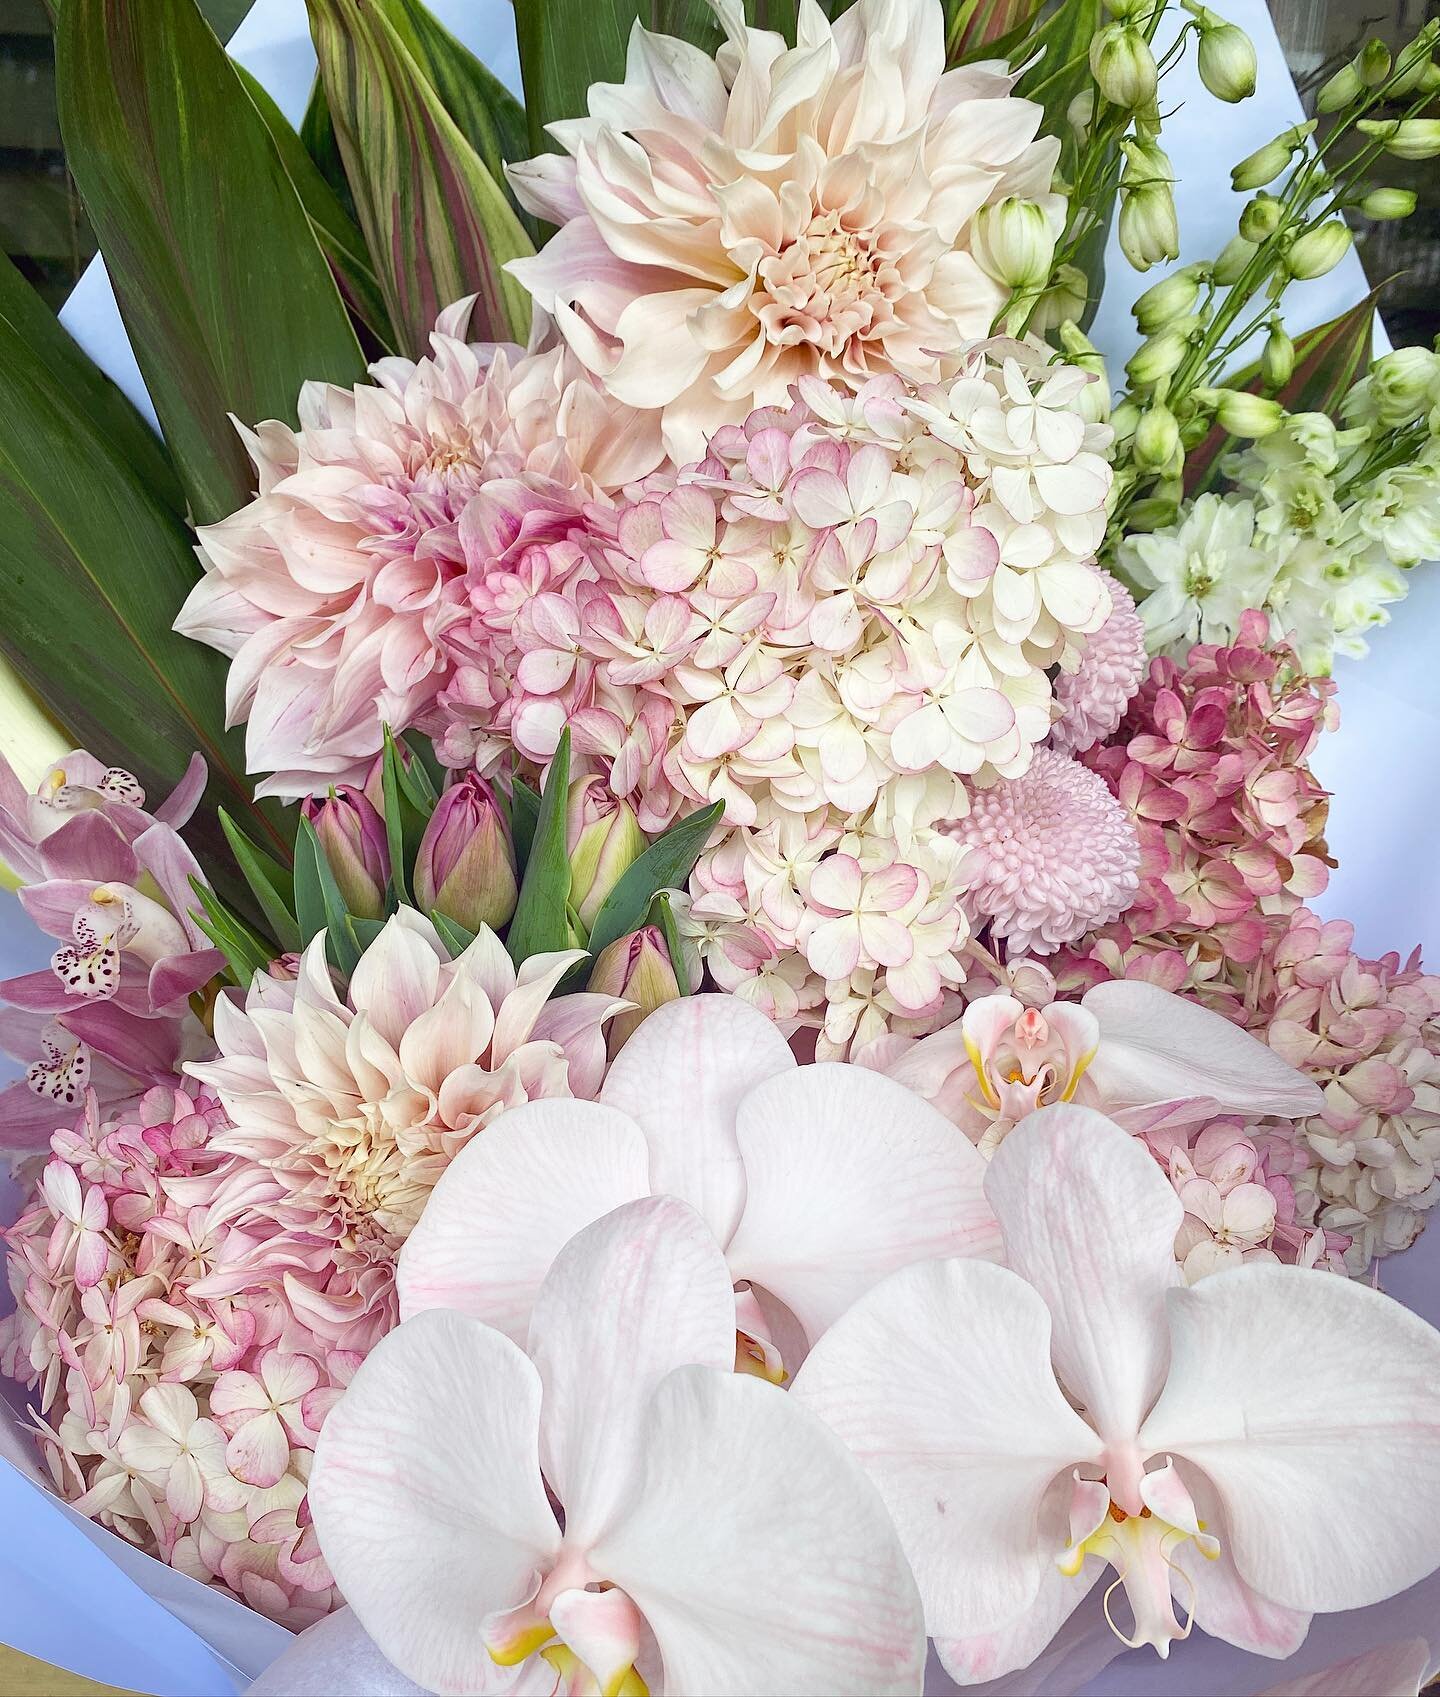 💞 How long will my flowers last? 💞

Most often, 7-10 days. But it varies a lot depending on the environment the flowers are kept in.

3 Tips to Making your Flowers Last Longer:

1. Use a clean vase. Dust and bacteria will dramatically decrease the 